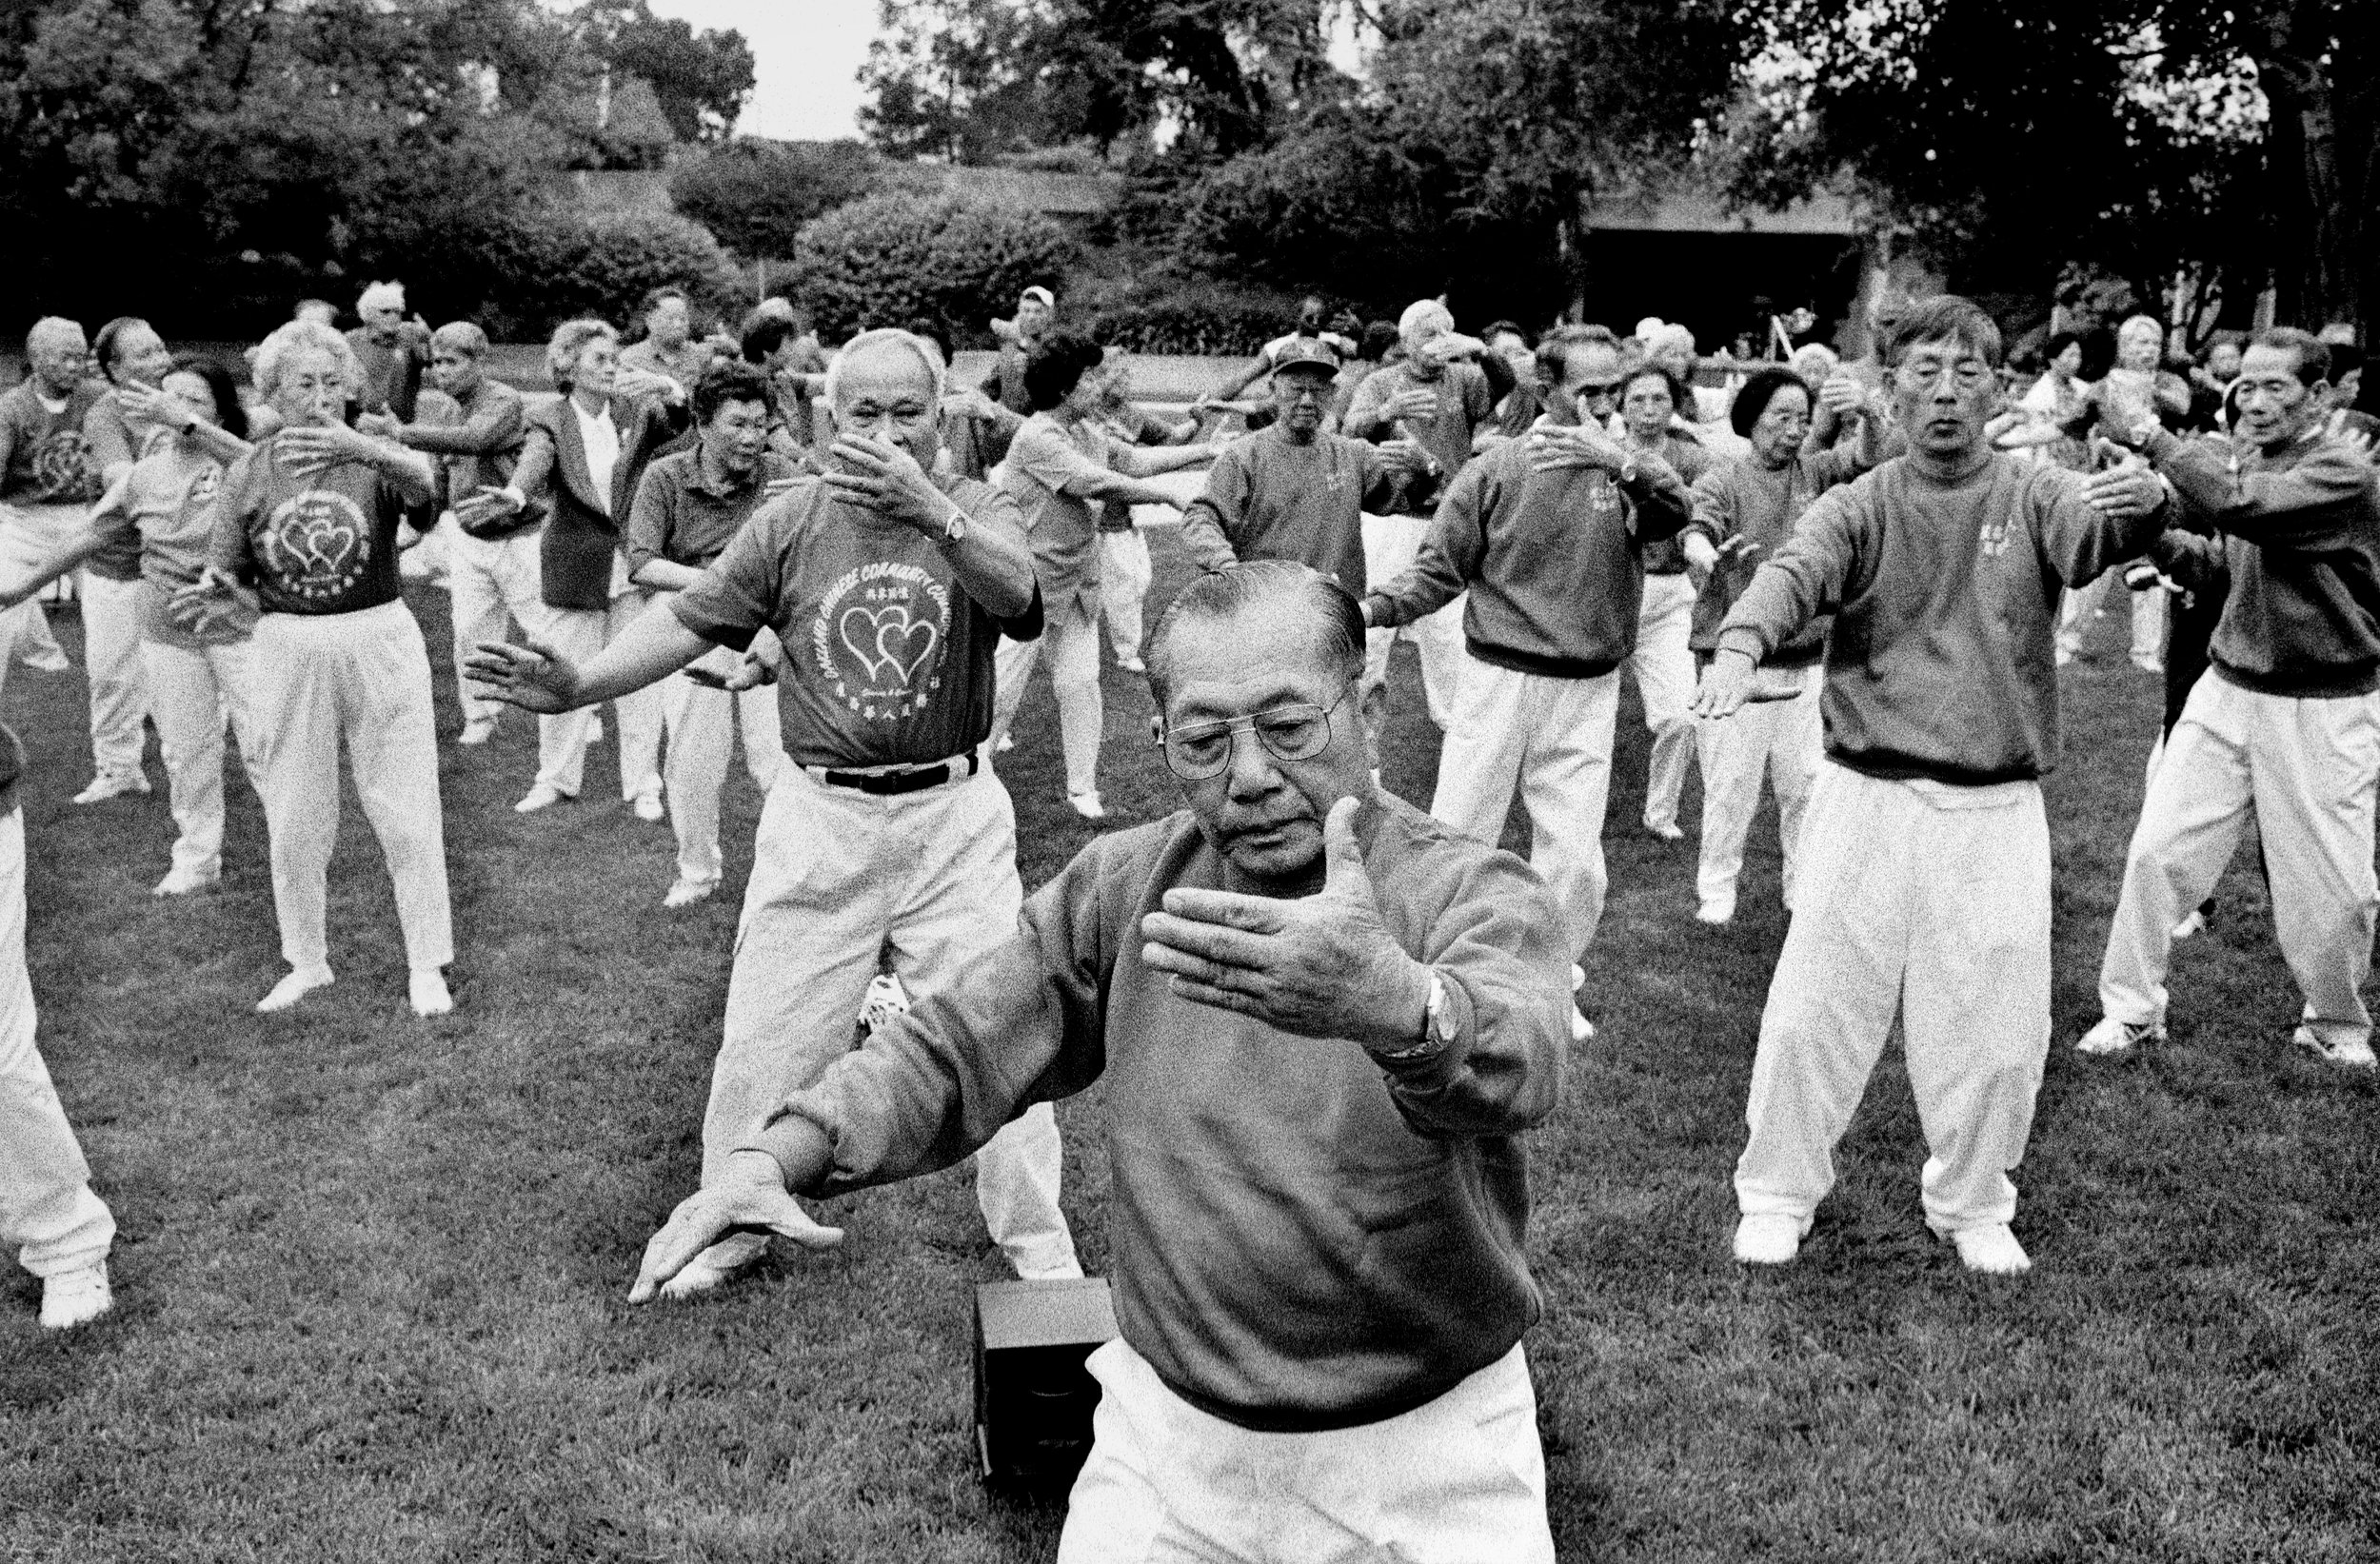  Seniors gather for a morning tai chi class on the lawn of the Oakland Museum. 2000 